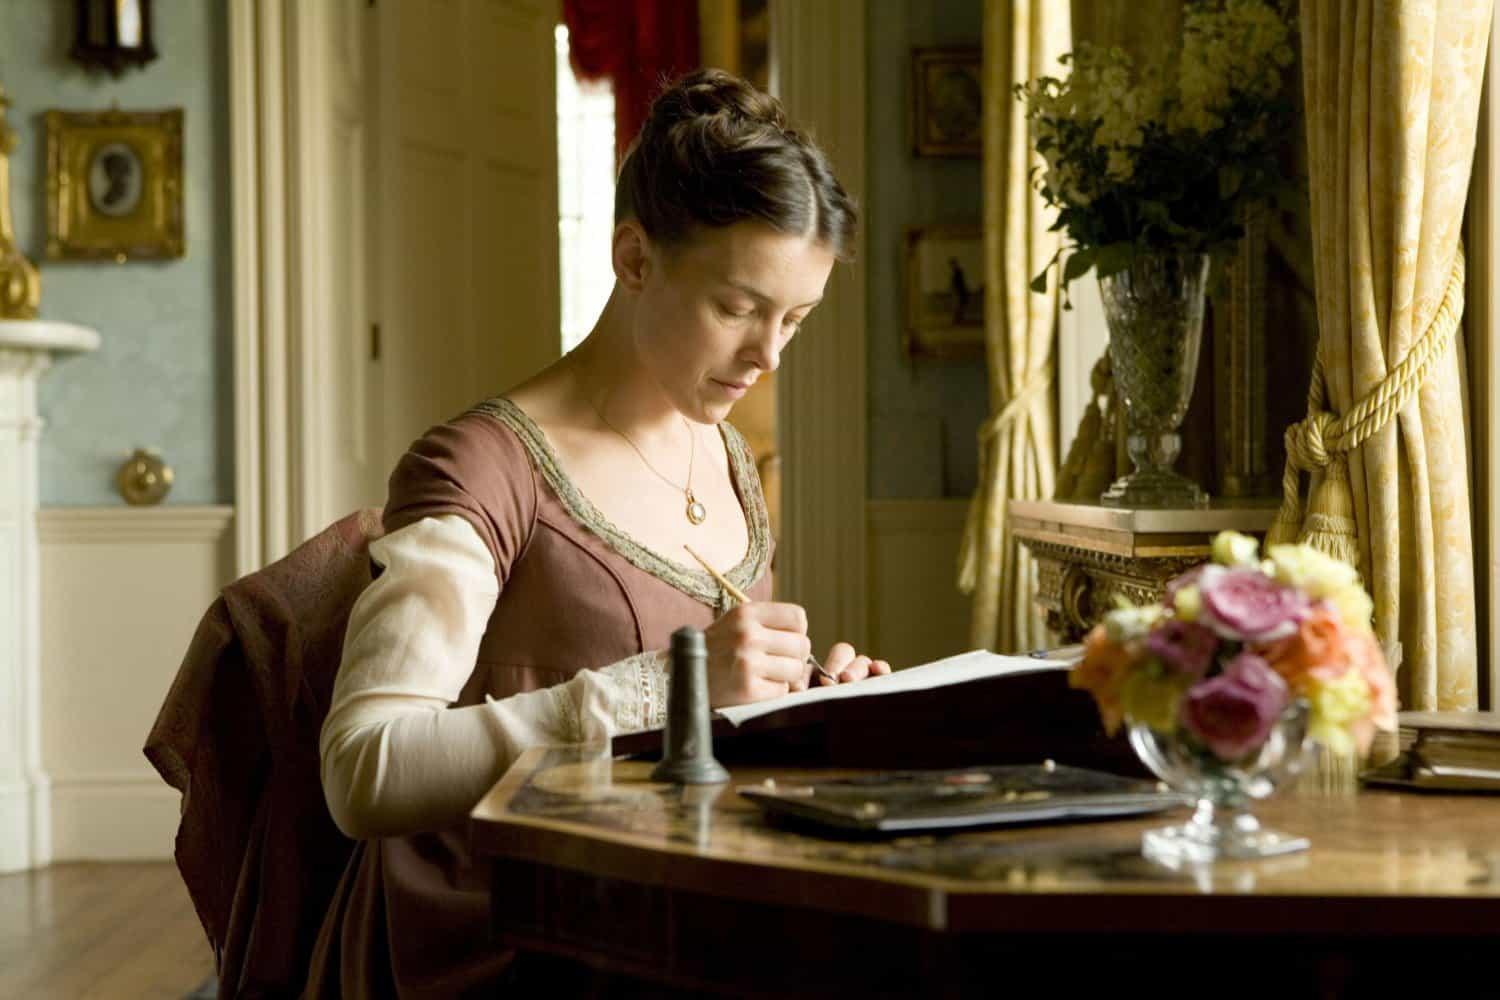 Perfection comes at a price in latest adaptation of Austen's 'Emma